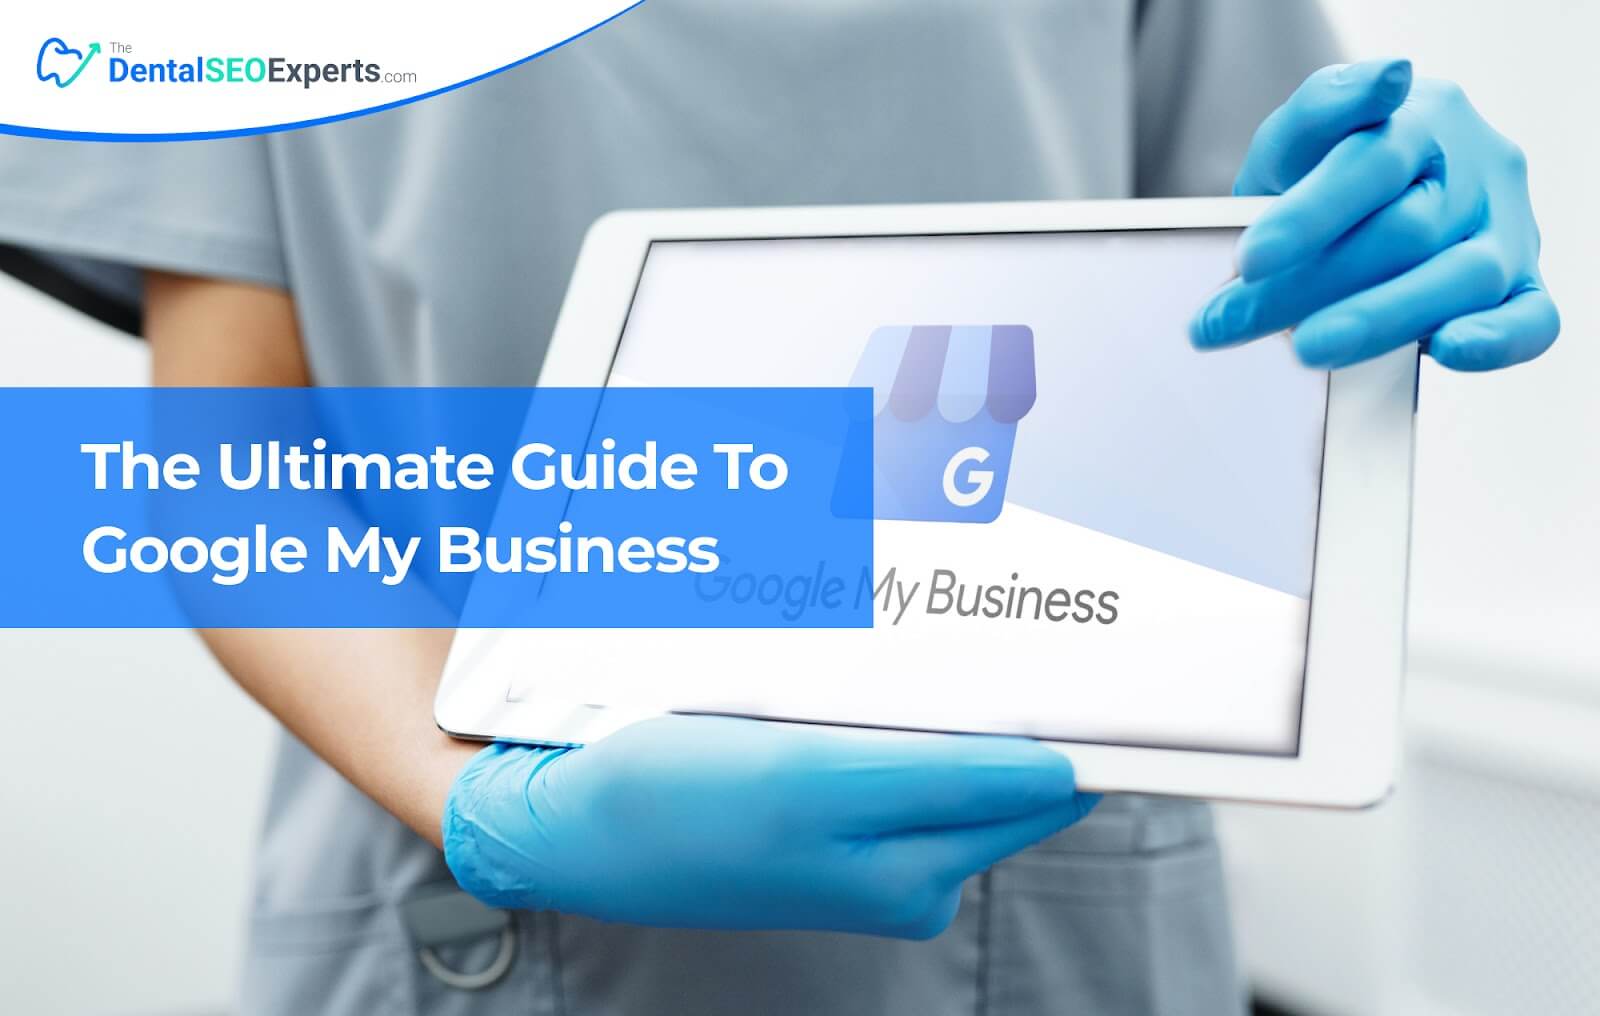 TheDentalSEOExperts - The Ultimate Guide To Google My Business